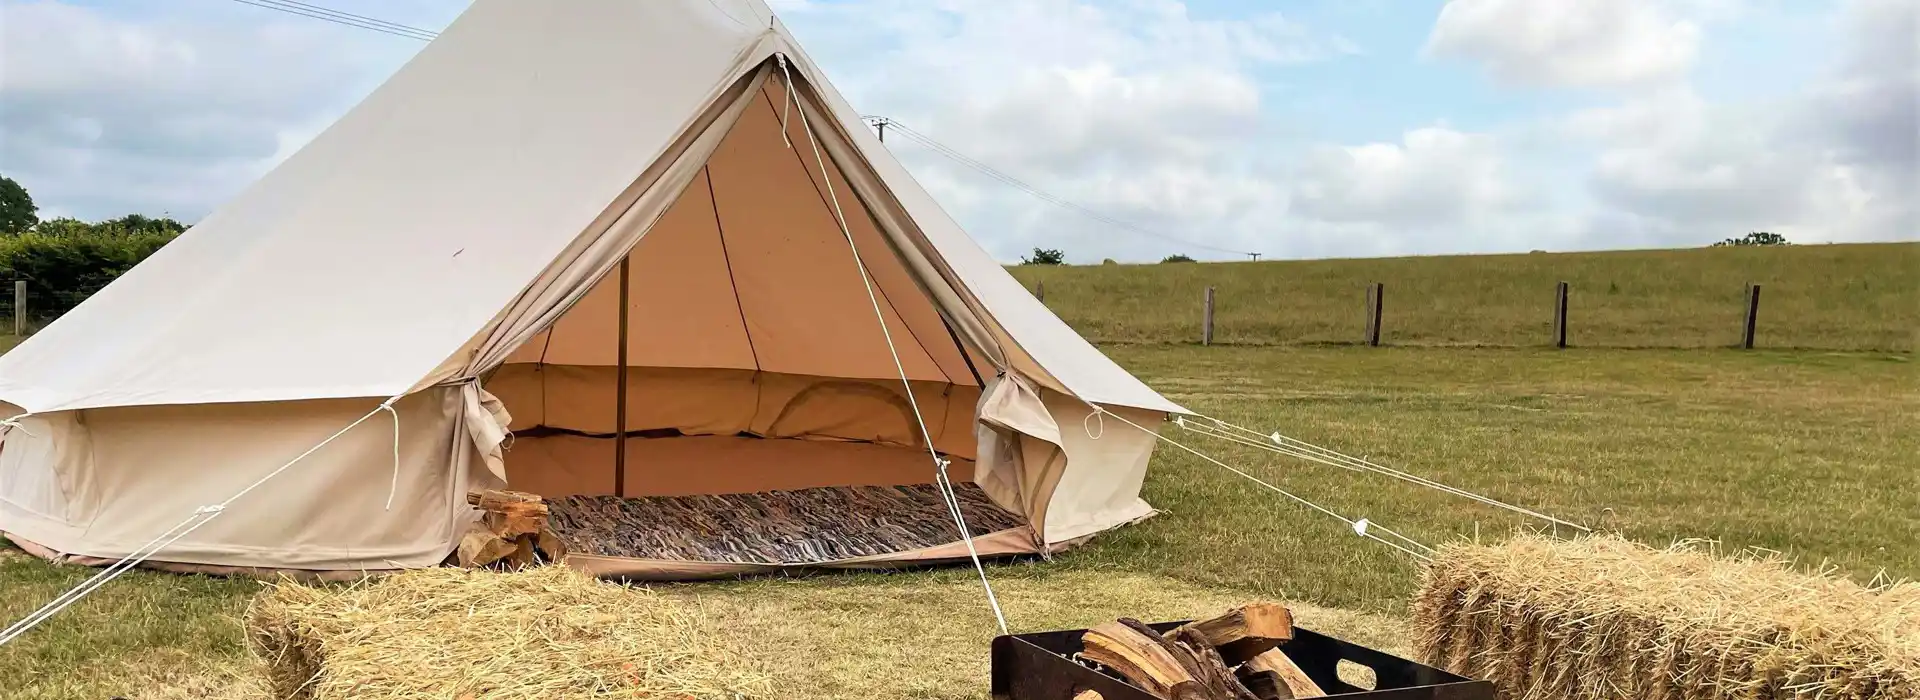 Glamping on a budget